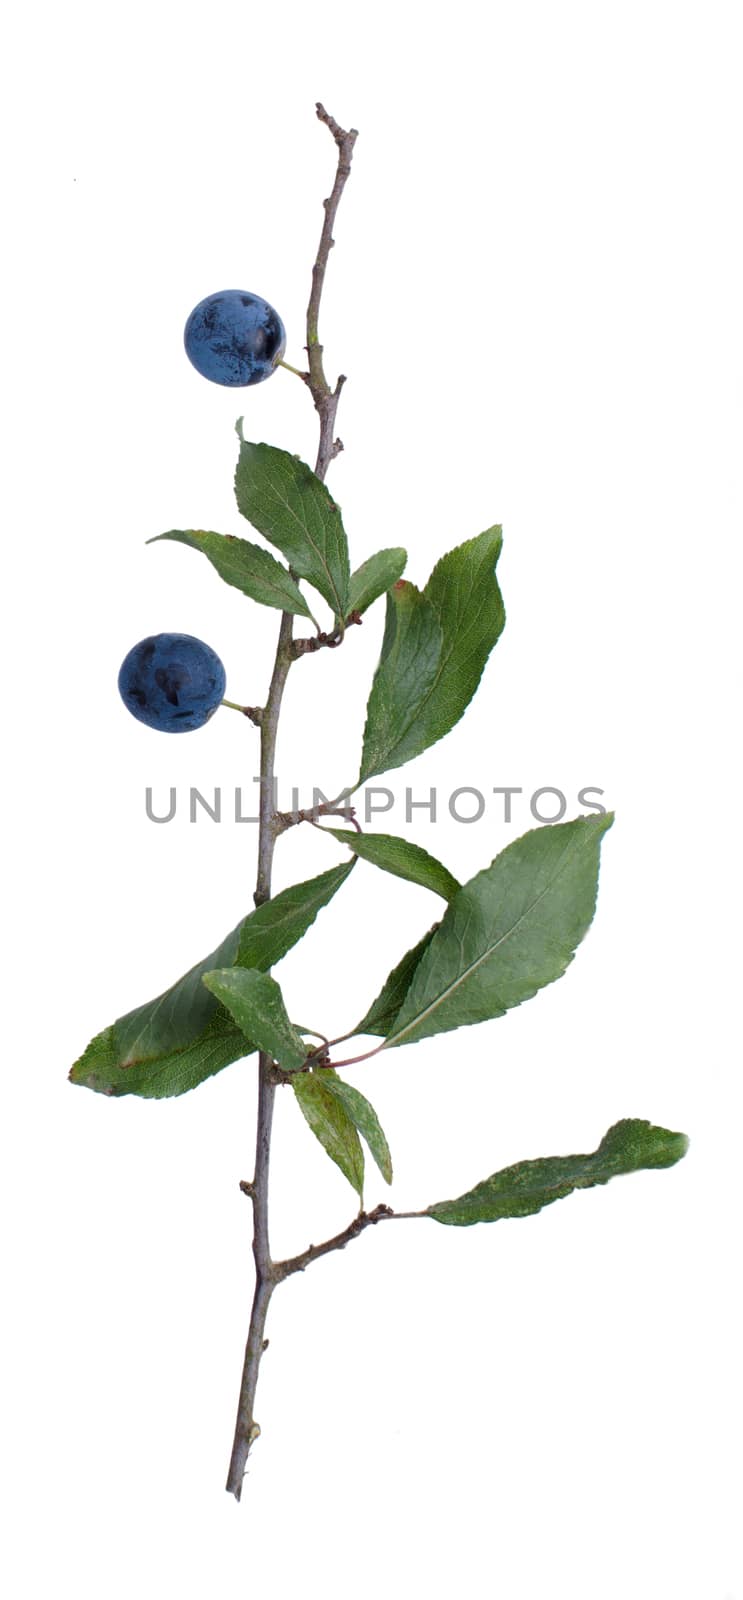 Prunus spinosa twig with berries isolated on white background.